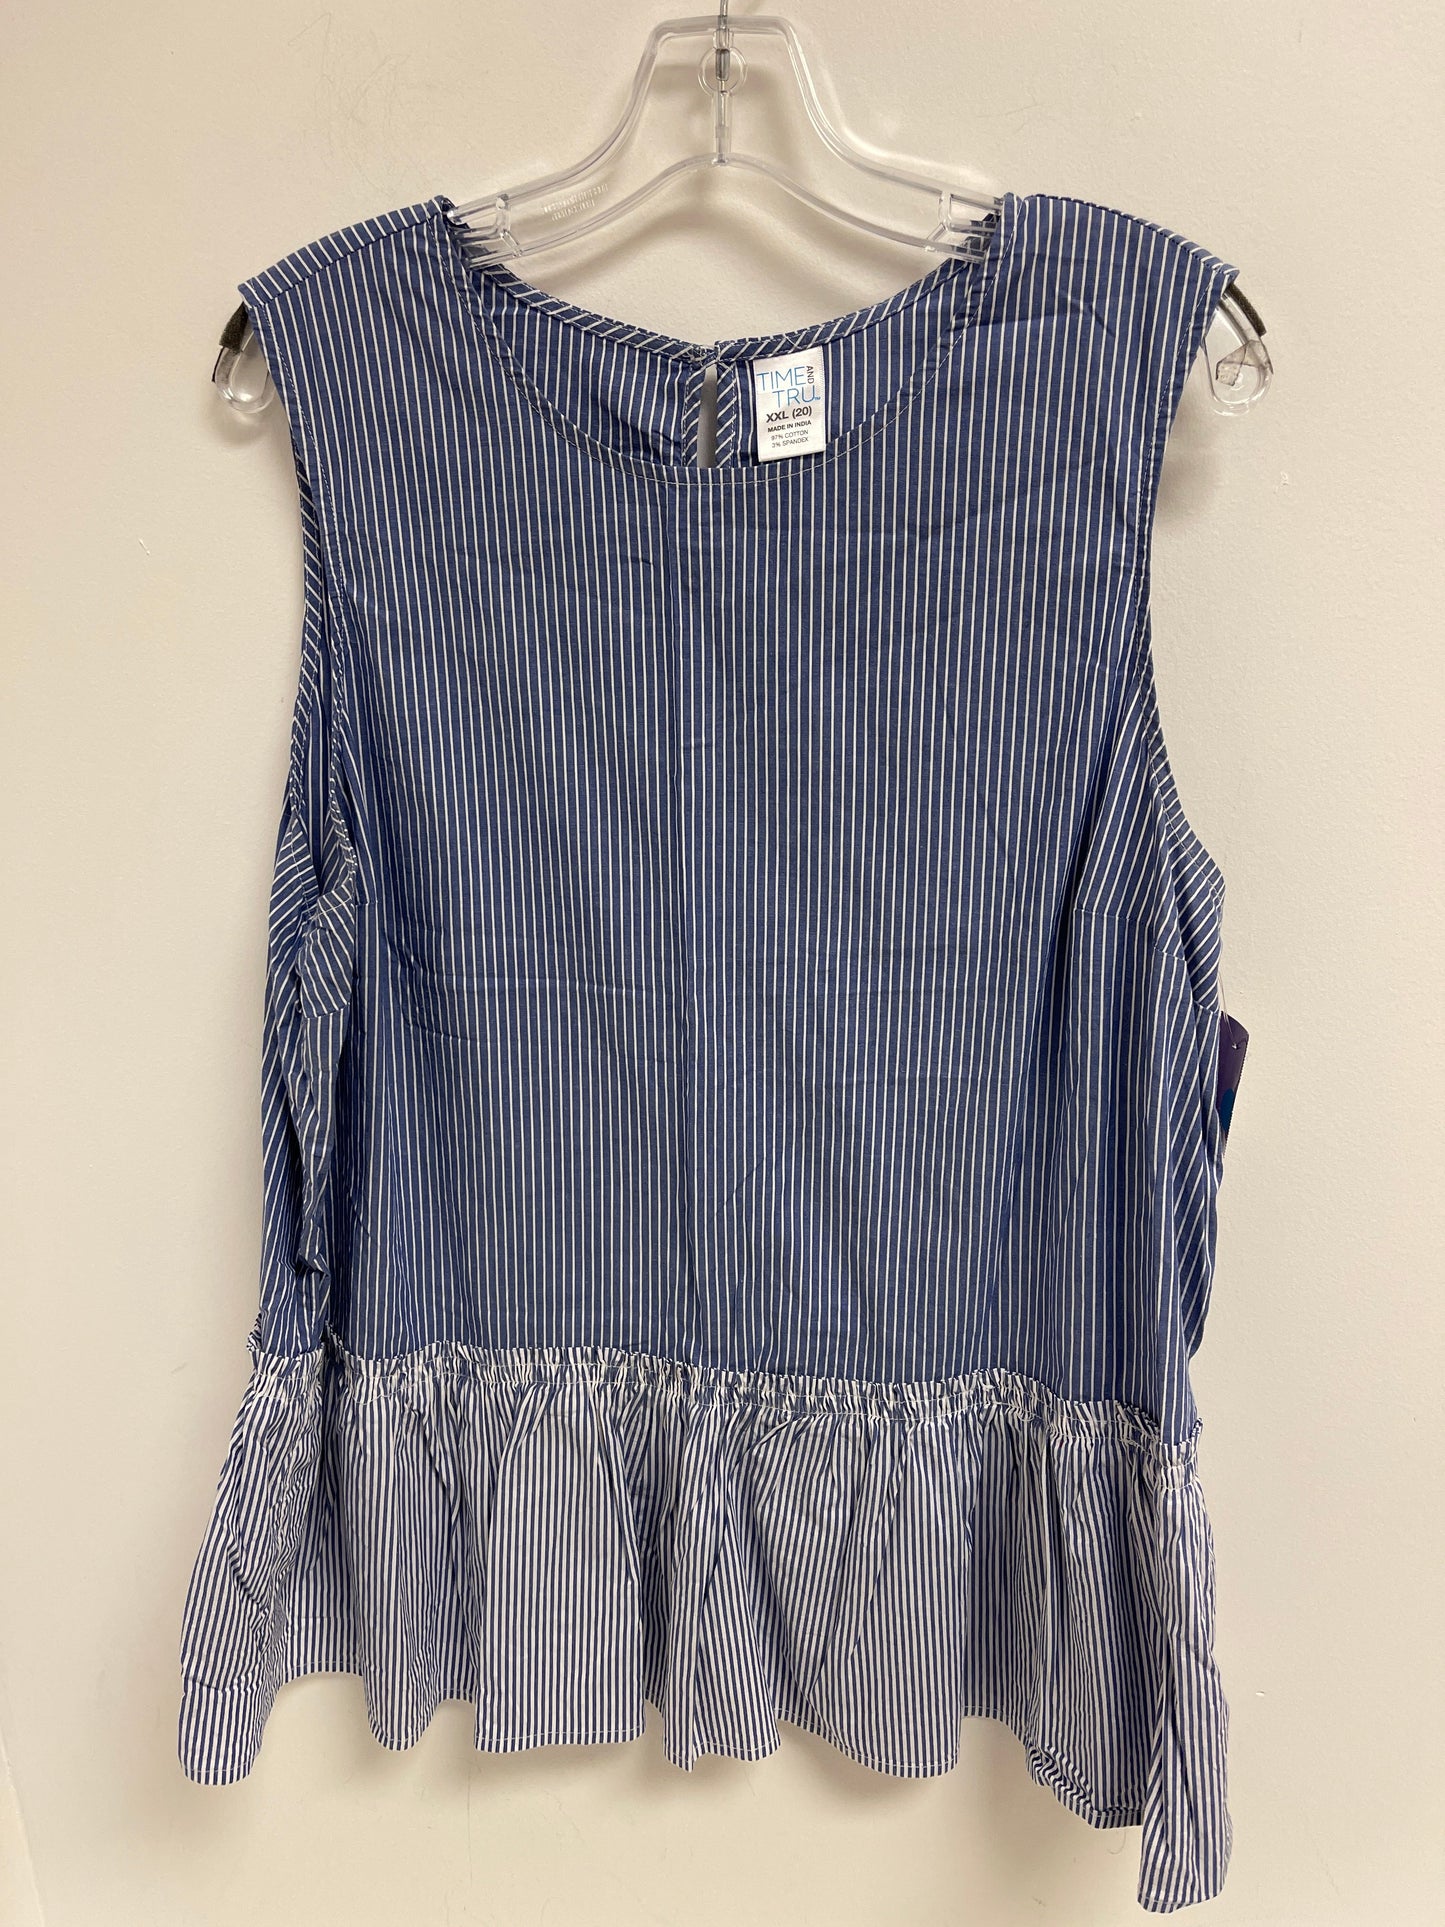 Blue Top Sleeveless Time And Tru, Size 2x